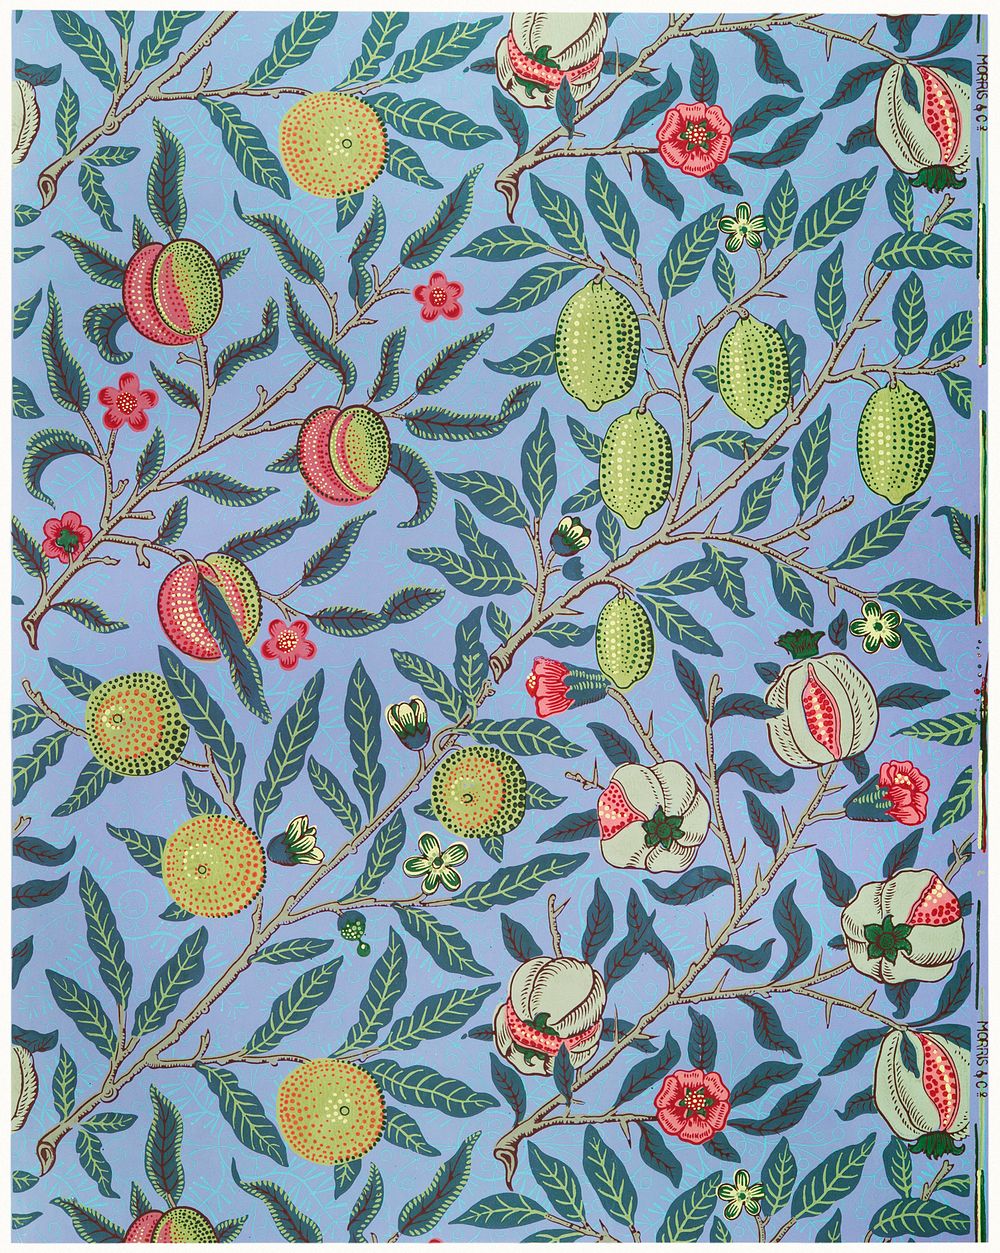 William Morris (1834-1896)'s Fruit or Pomegranate. Famous wallpaper, original from The MET Museum. Digitally enhanced by…